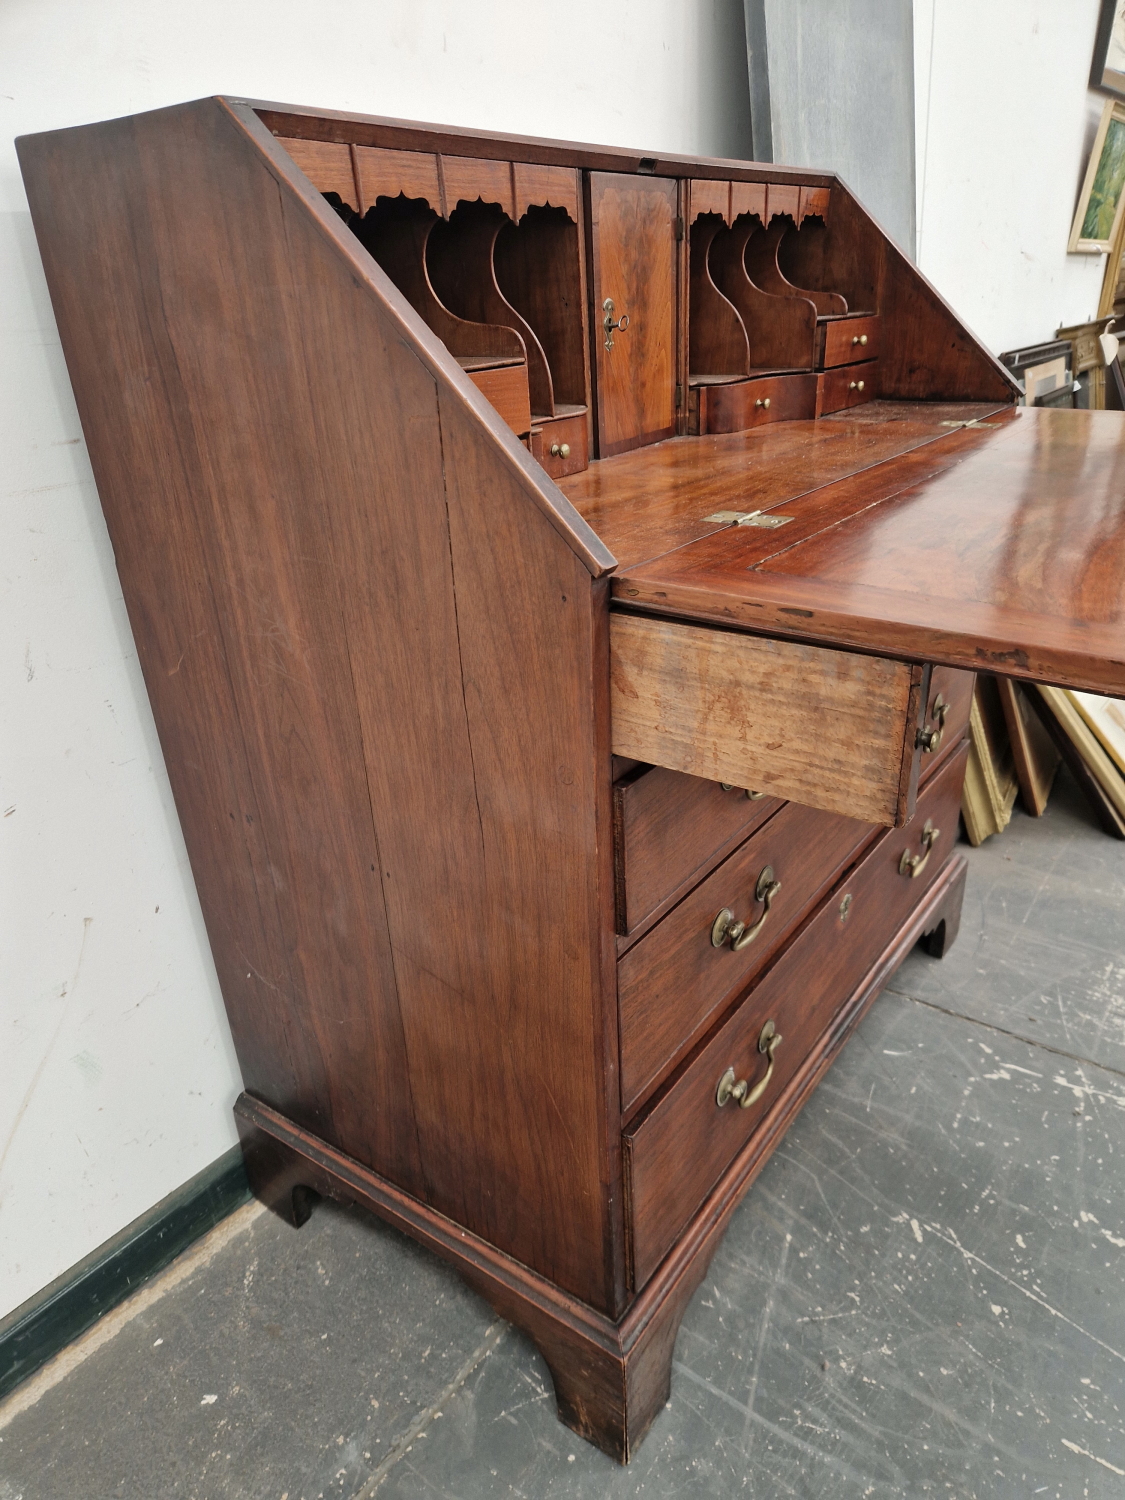 A GEORGE III FRUIT WOOD BUREAU, THE FALL ABOVE FOUR GRADED DRAWERS - Image 5 of 6